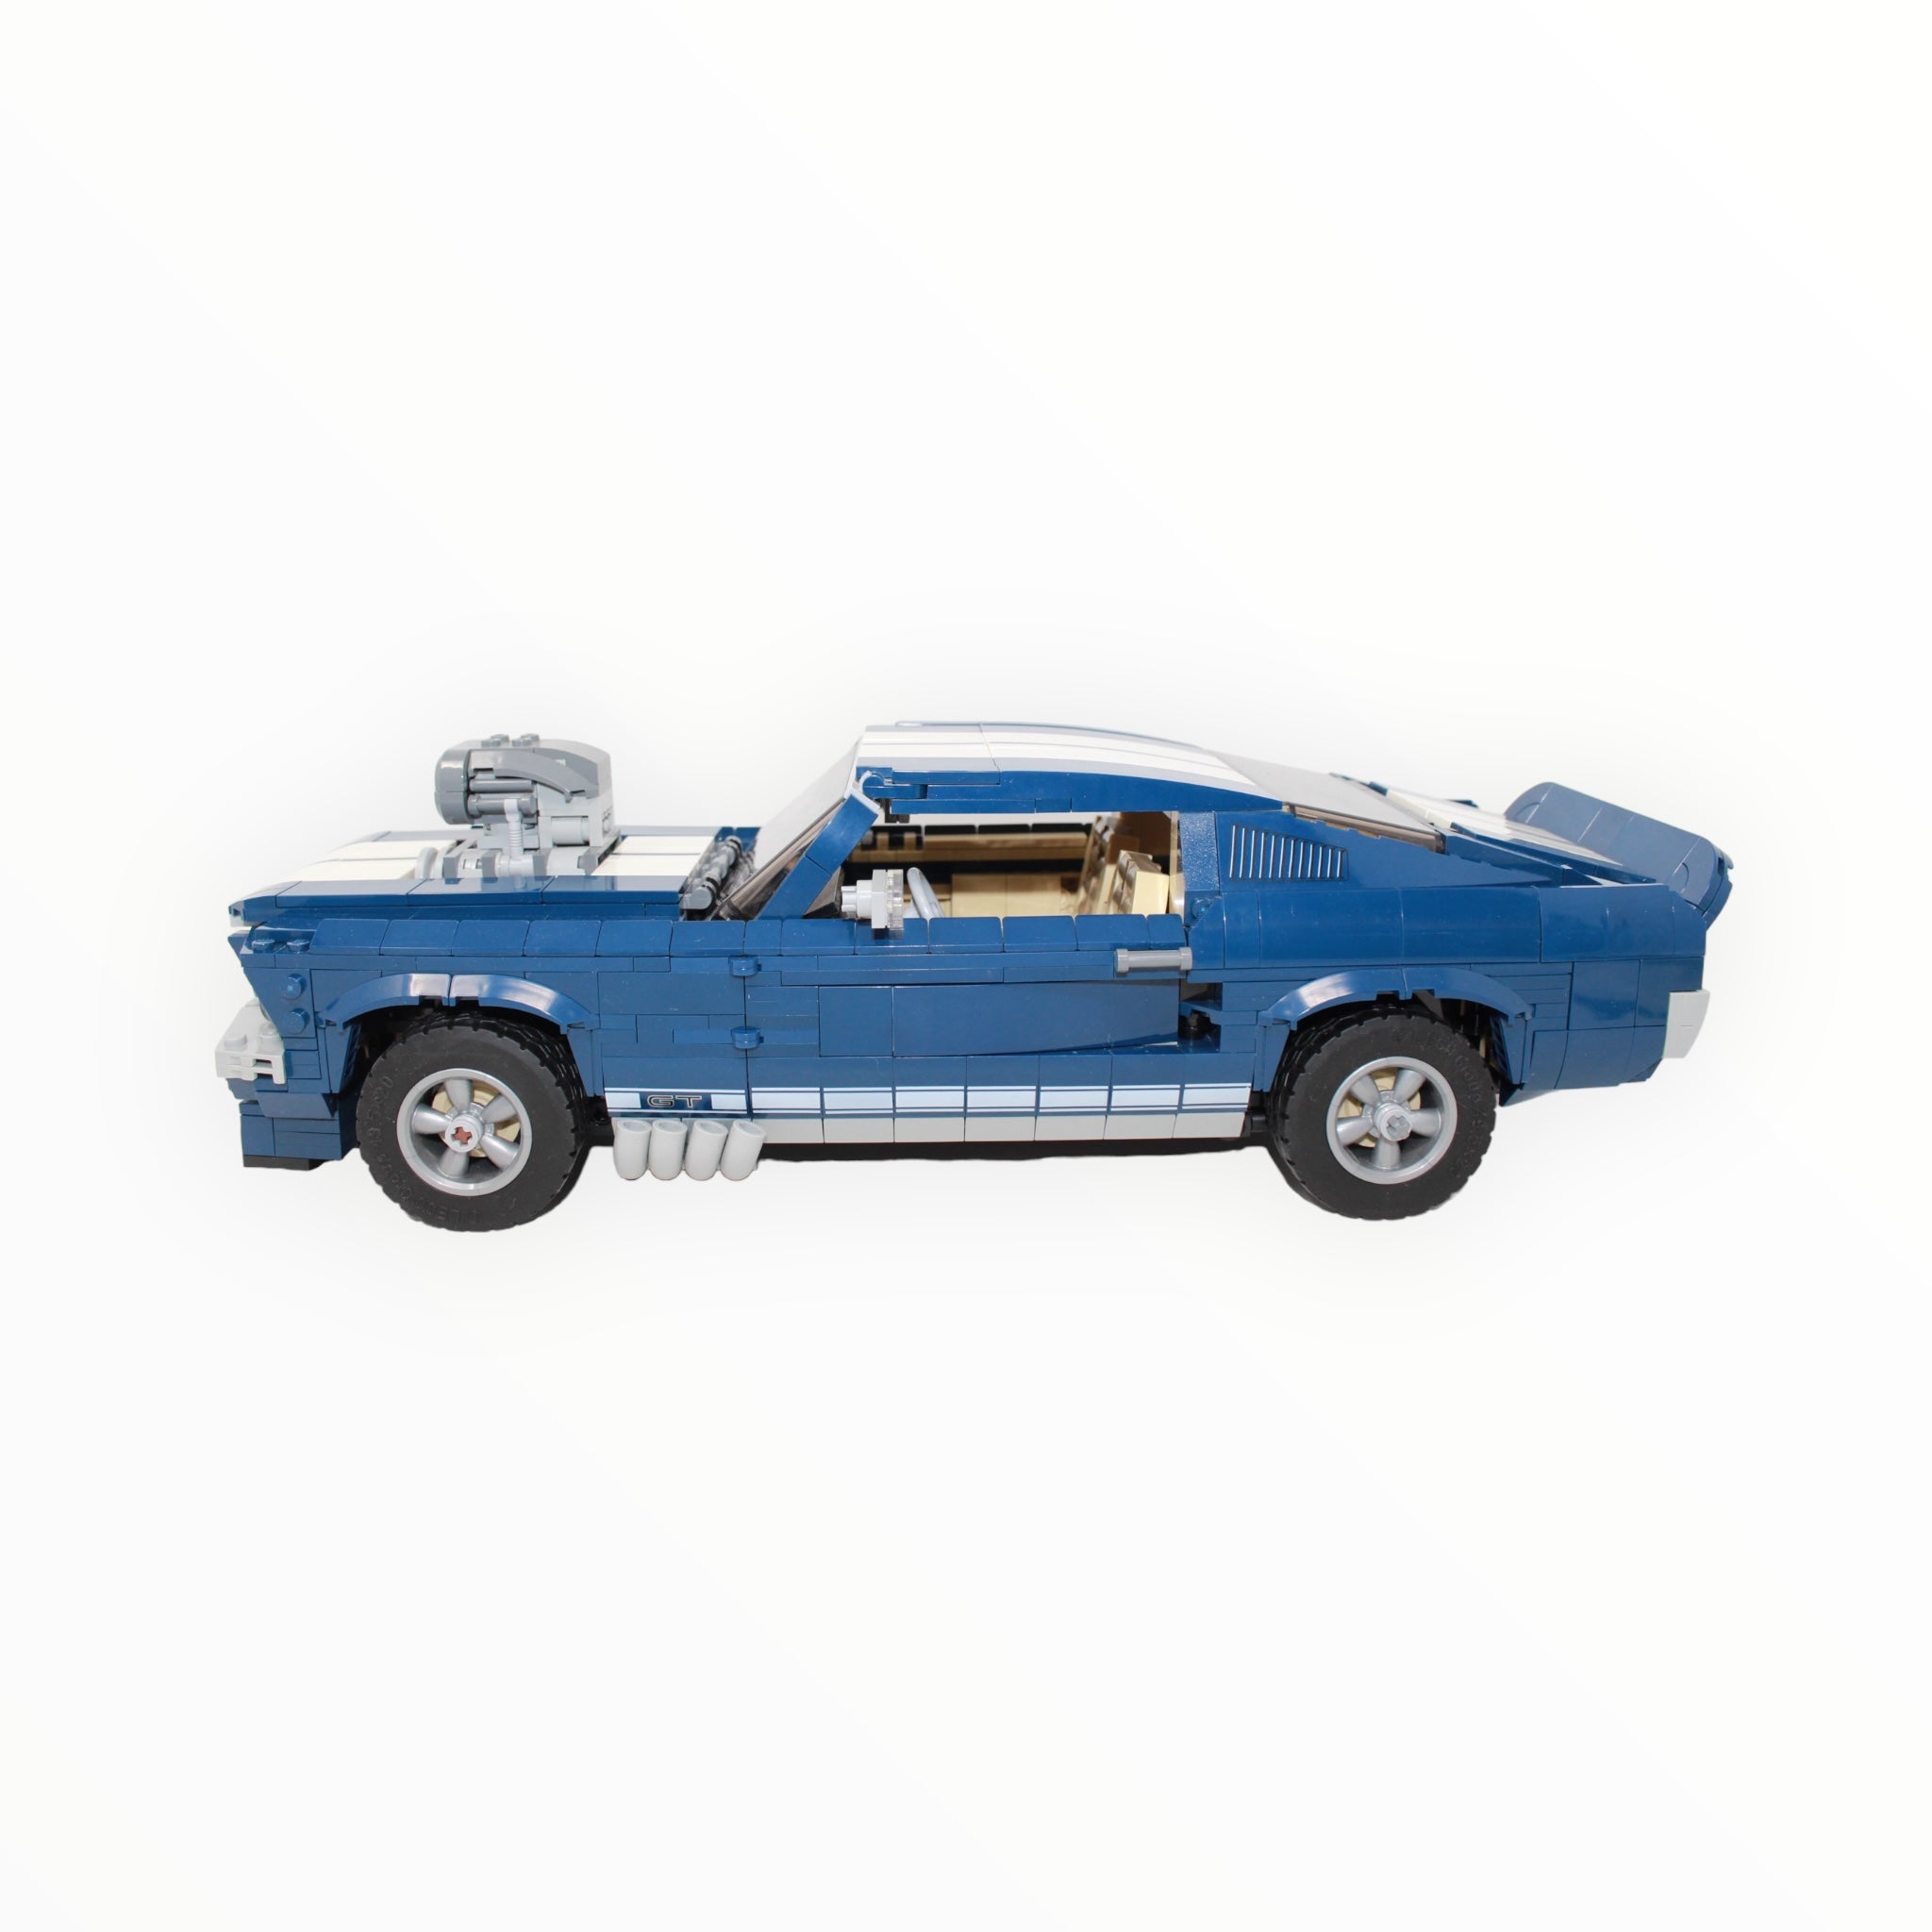 Used Set 10265 Creator Ford Mustang